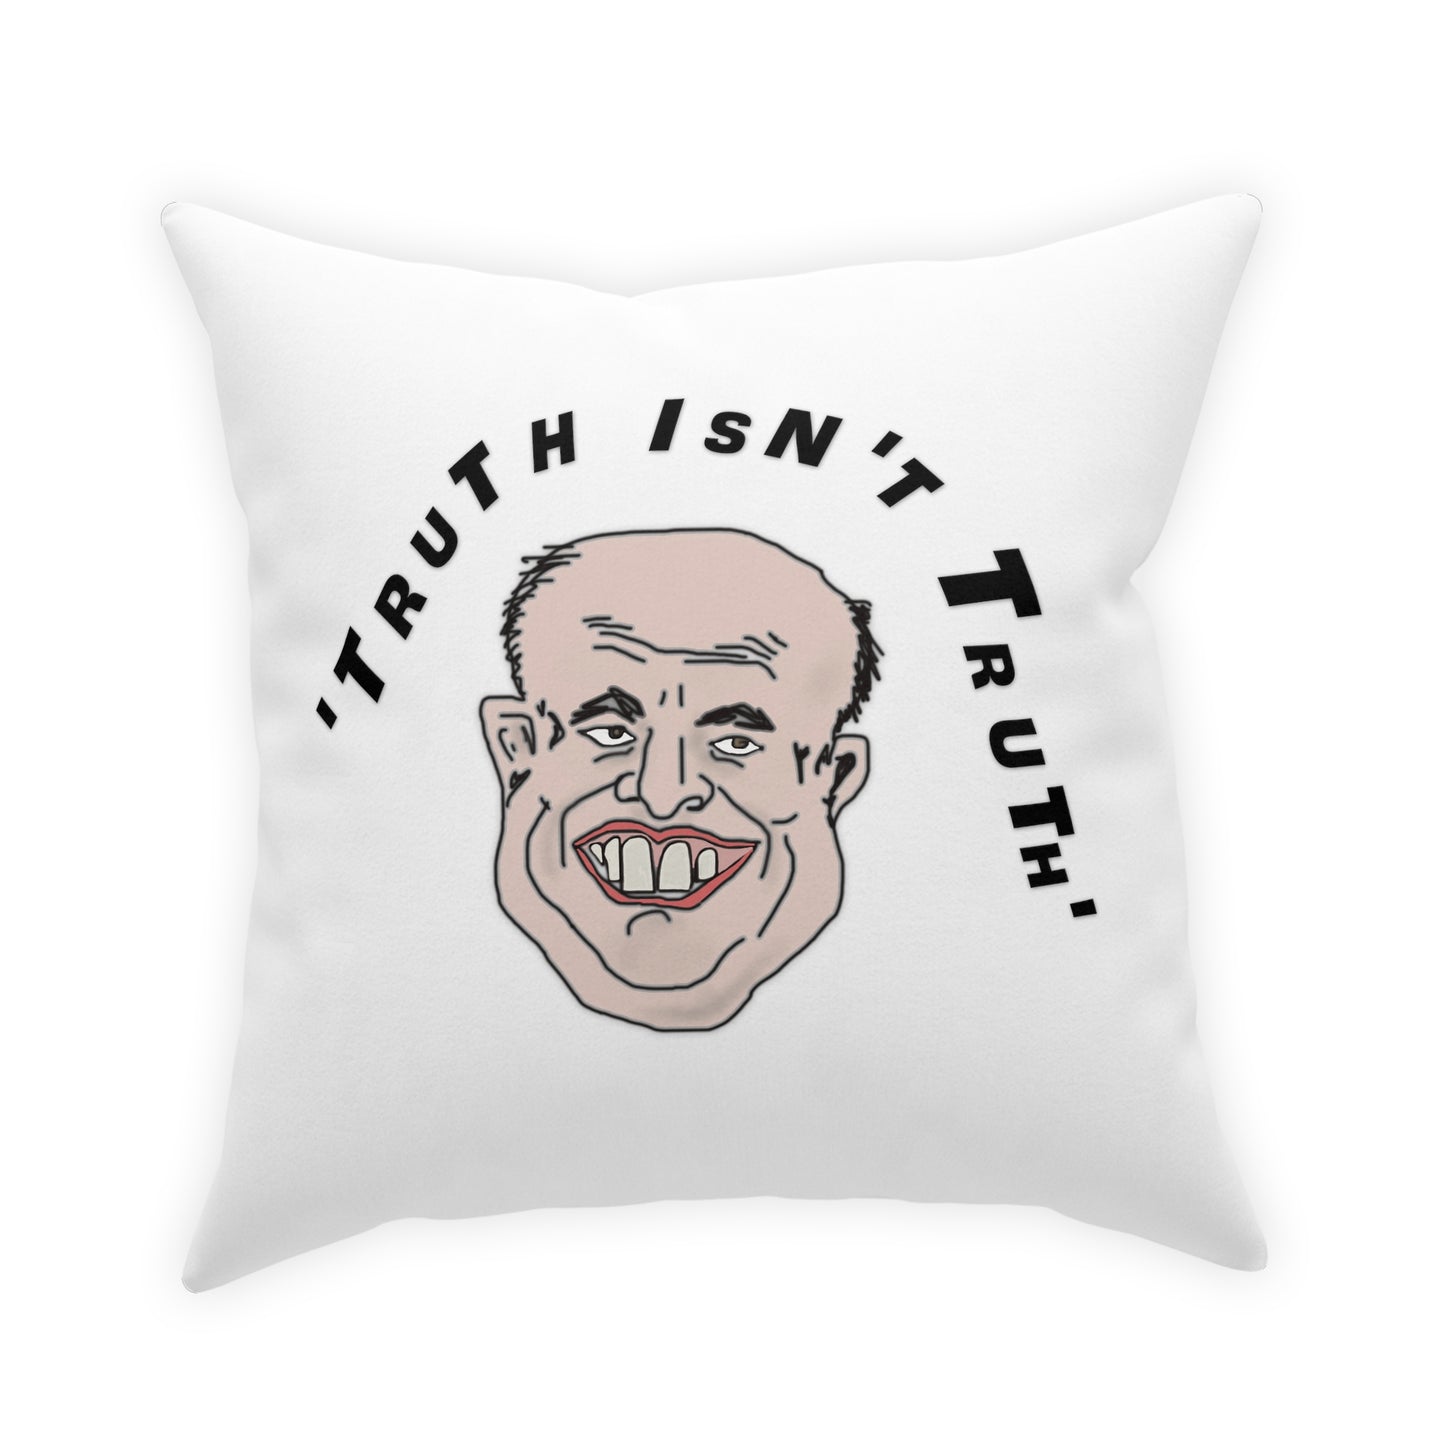 Rudy's Truth Pillow